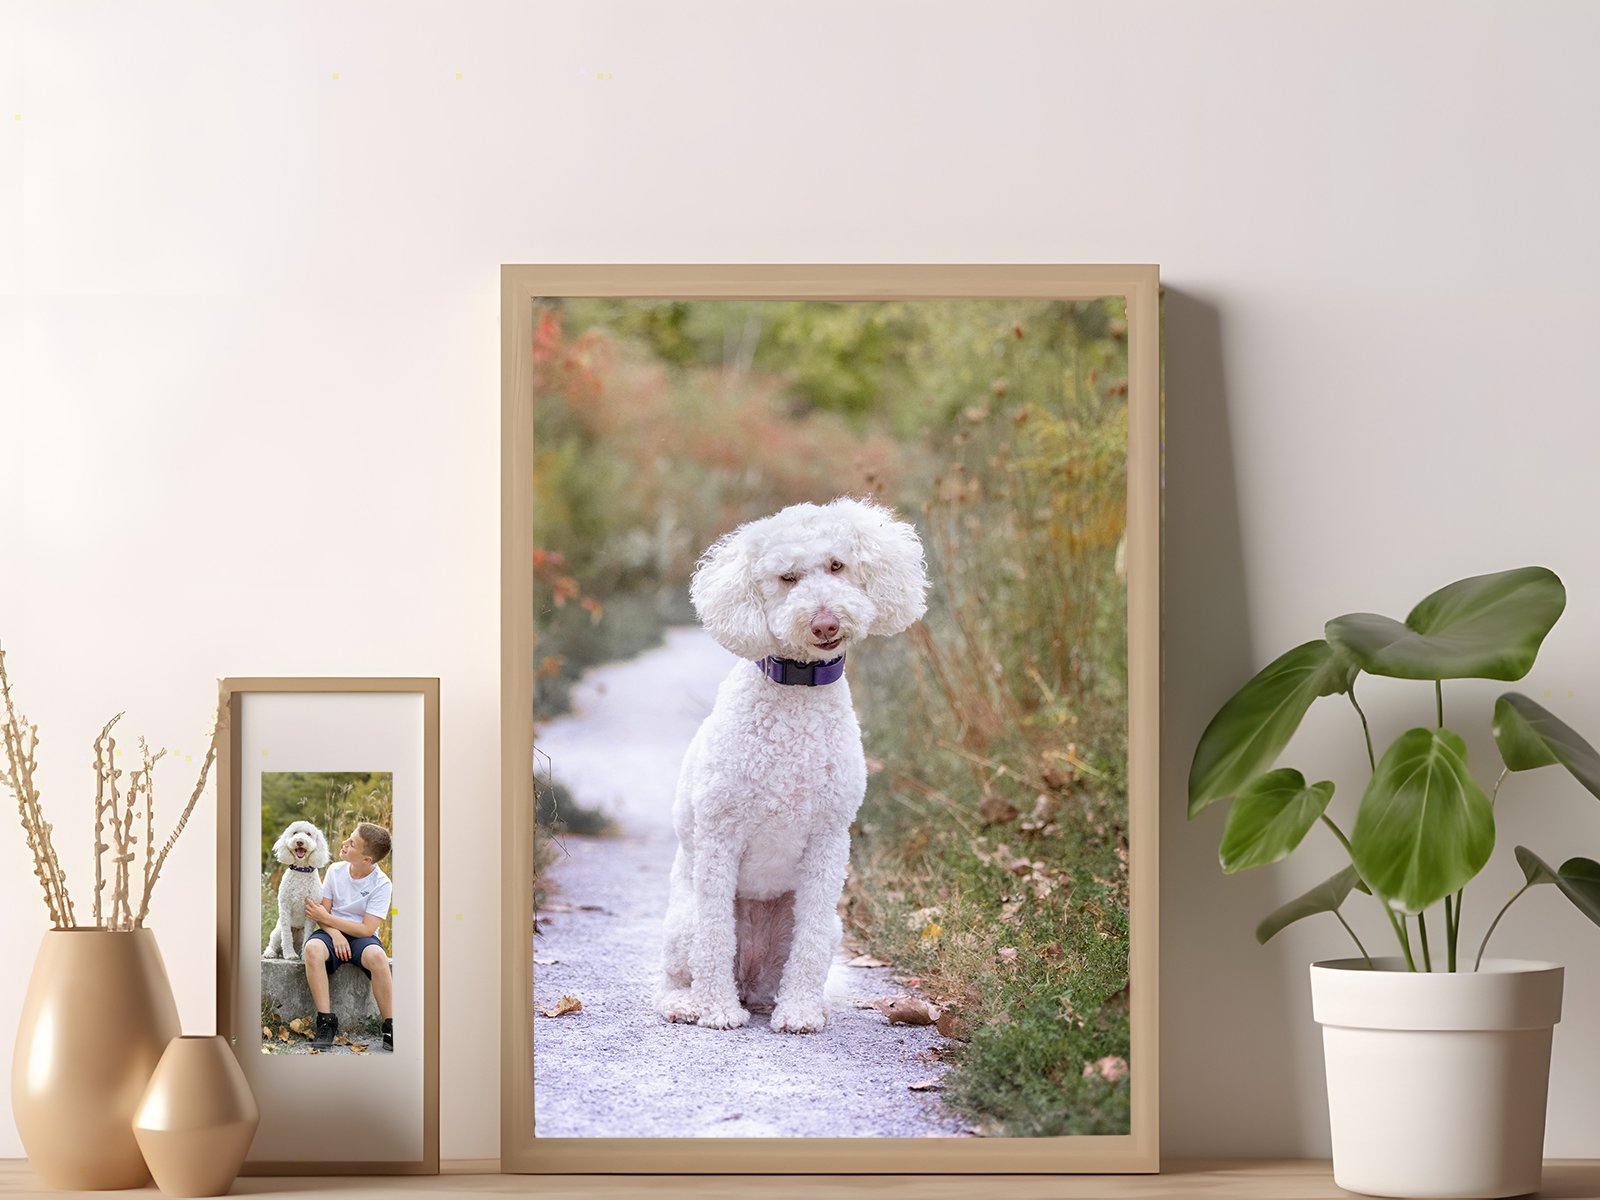 SMALLER FRAMED PET PHOTOS DISPLAYED ON A SHELF OR TABLE